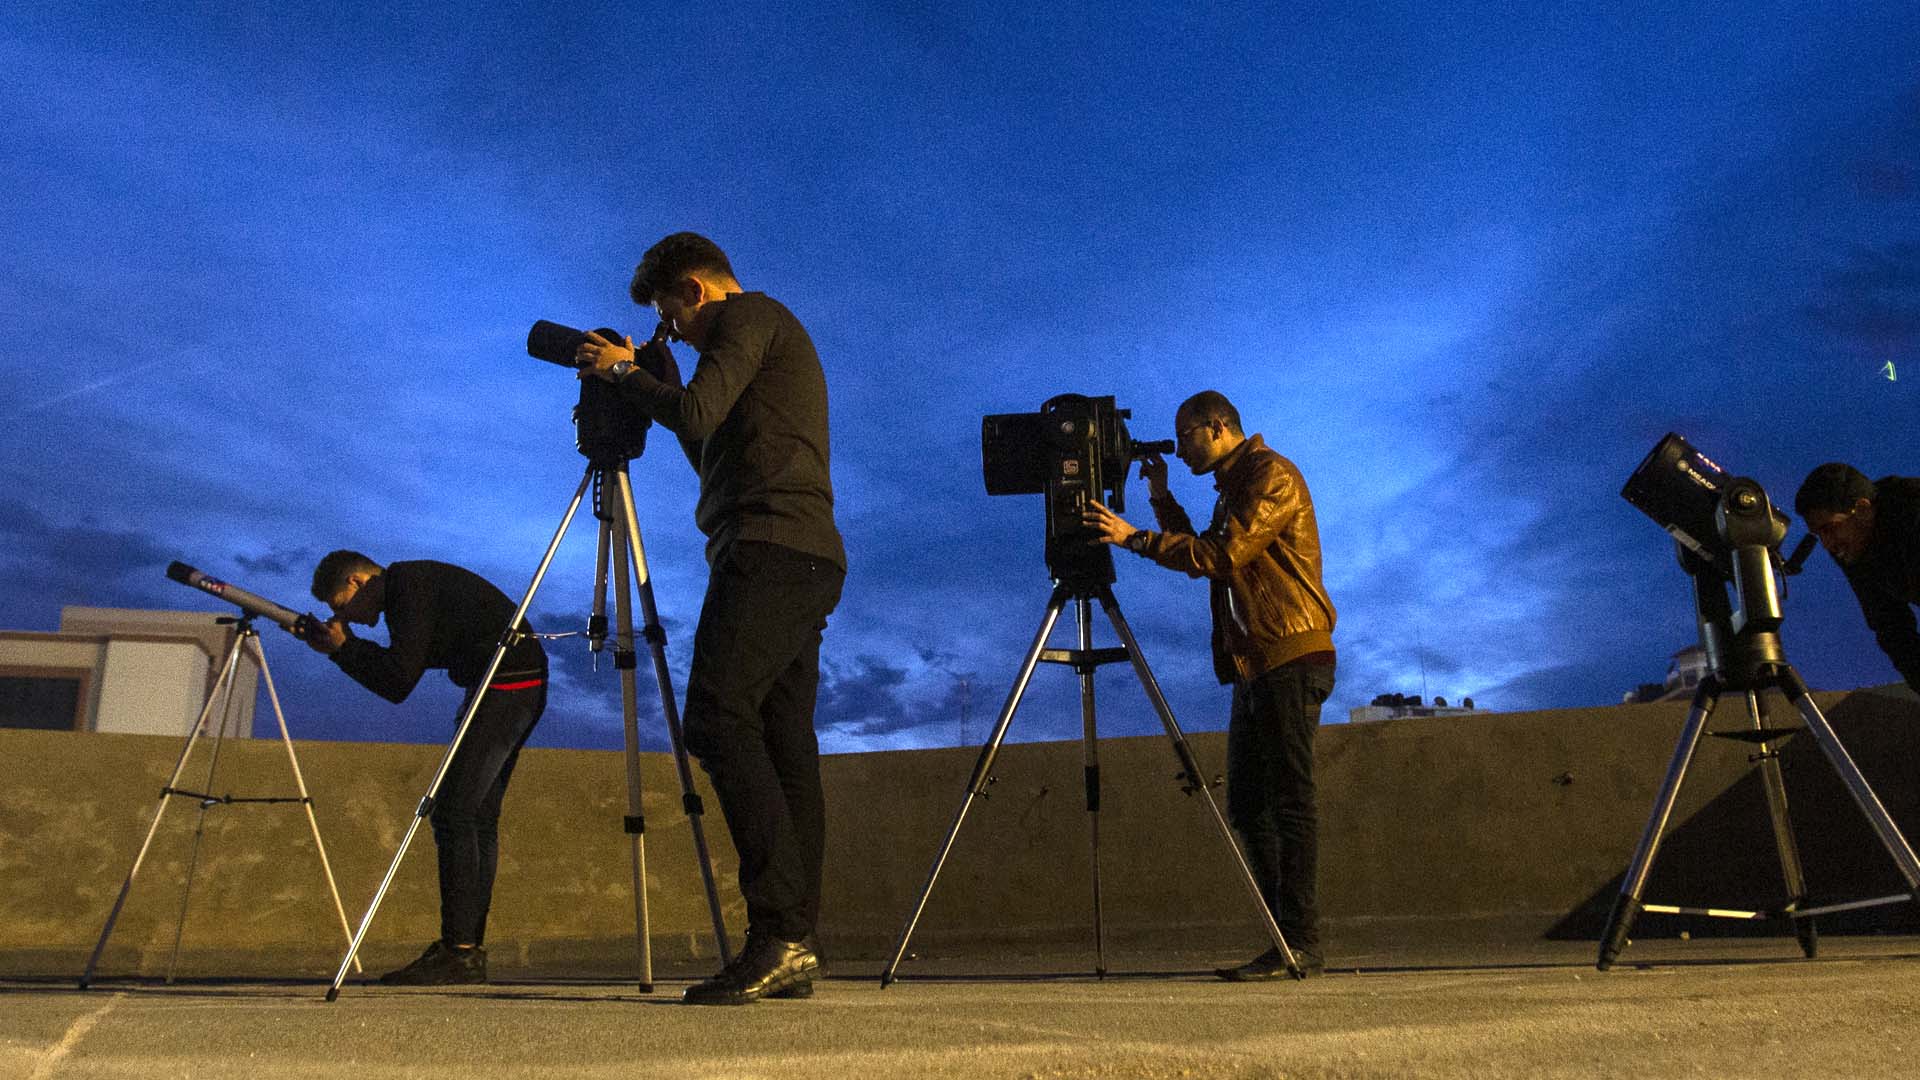 From left to right: Ibrahim Saad, Mohammad Baraka, and colleagues point their telescopes skyward from a rooftop of one of the buildings of al-Aqsa University in Gaza City on December 11, 2019.